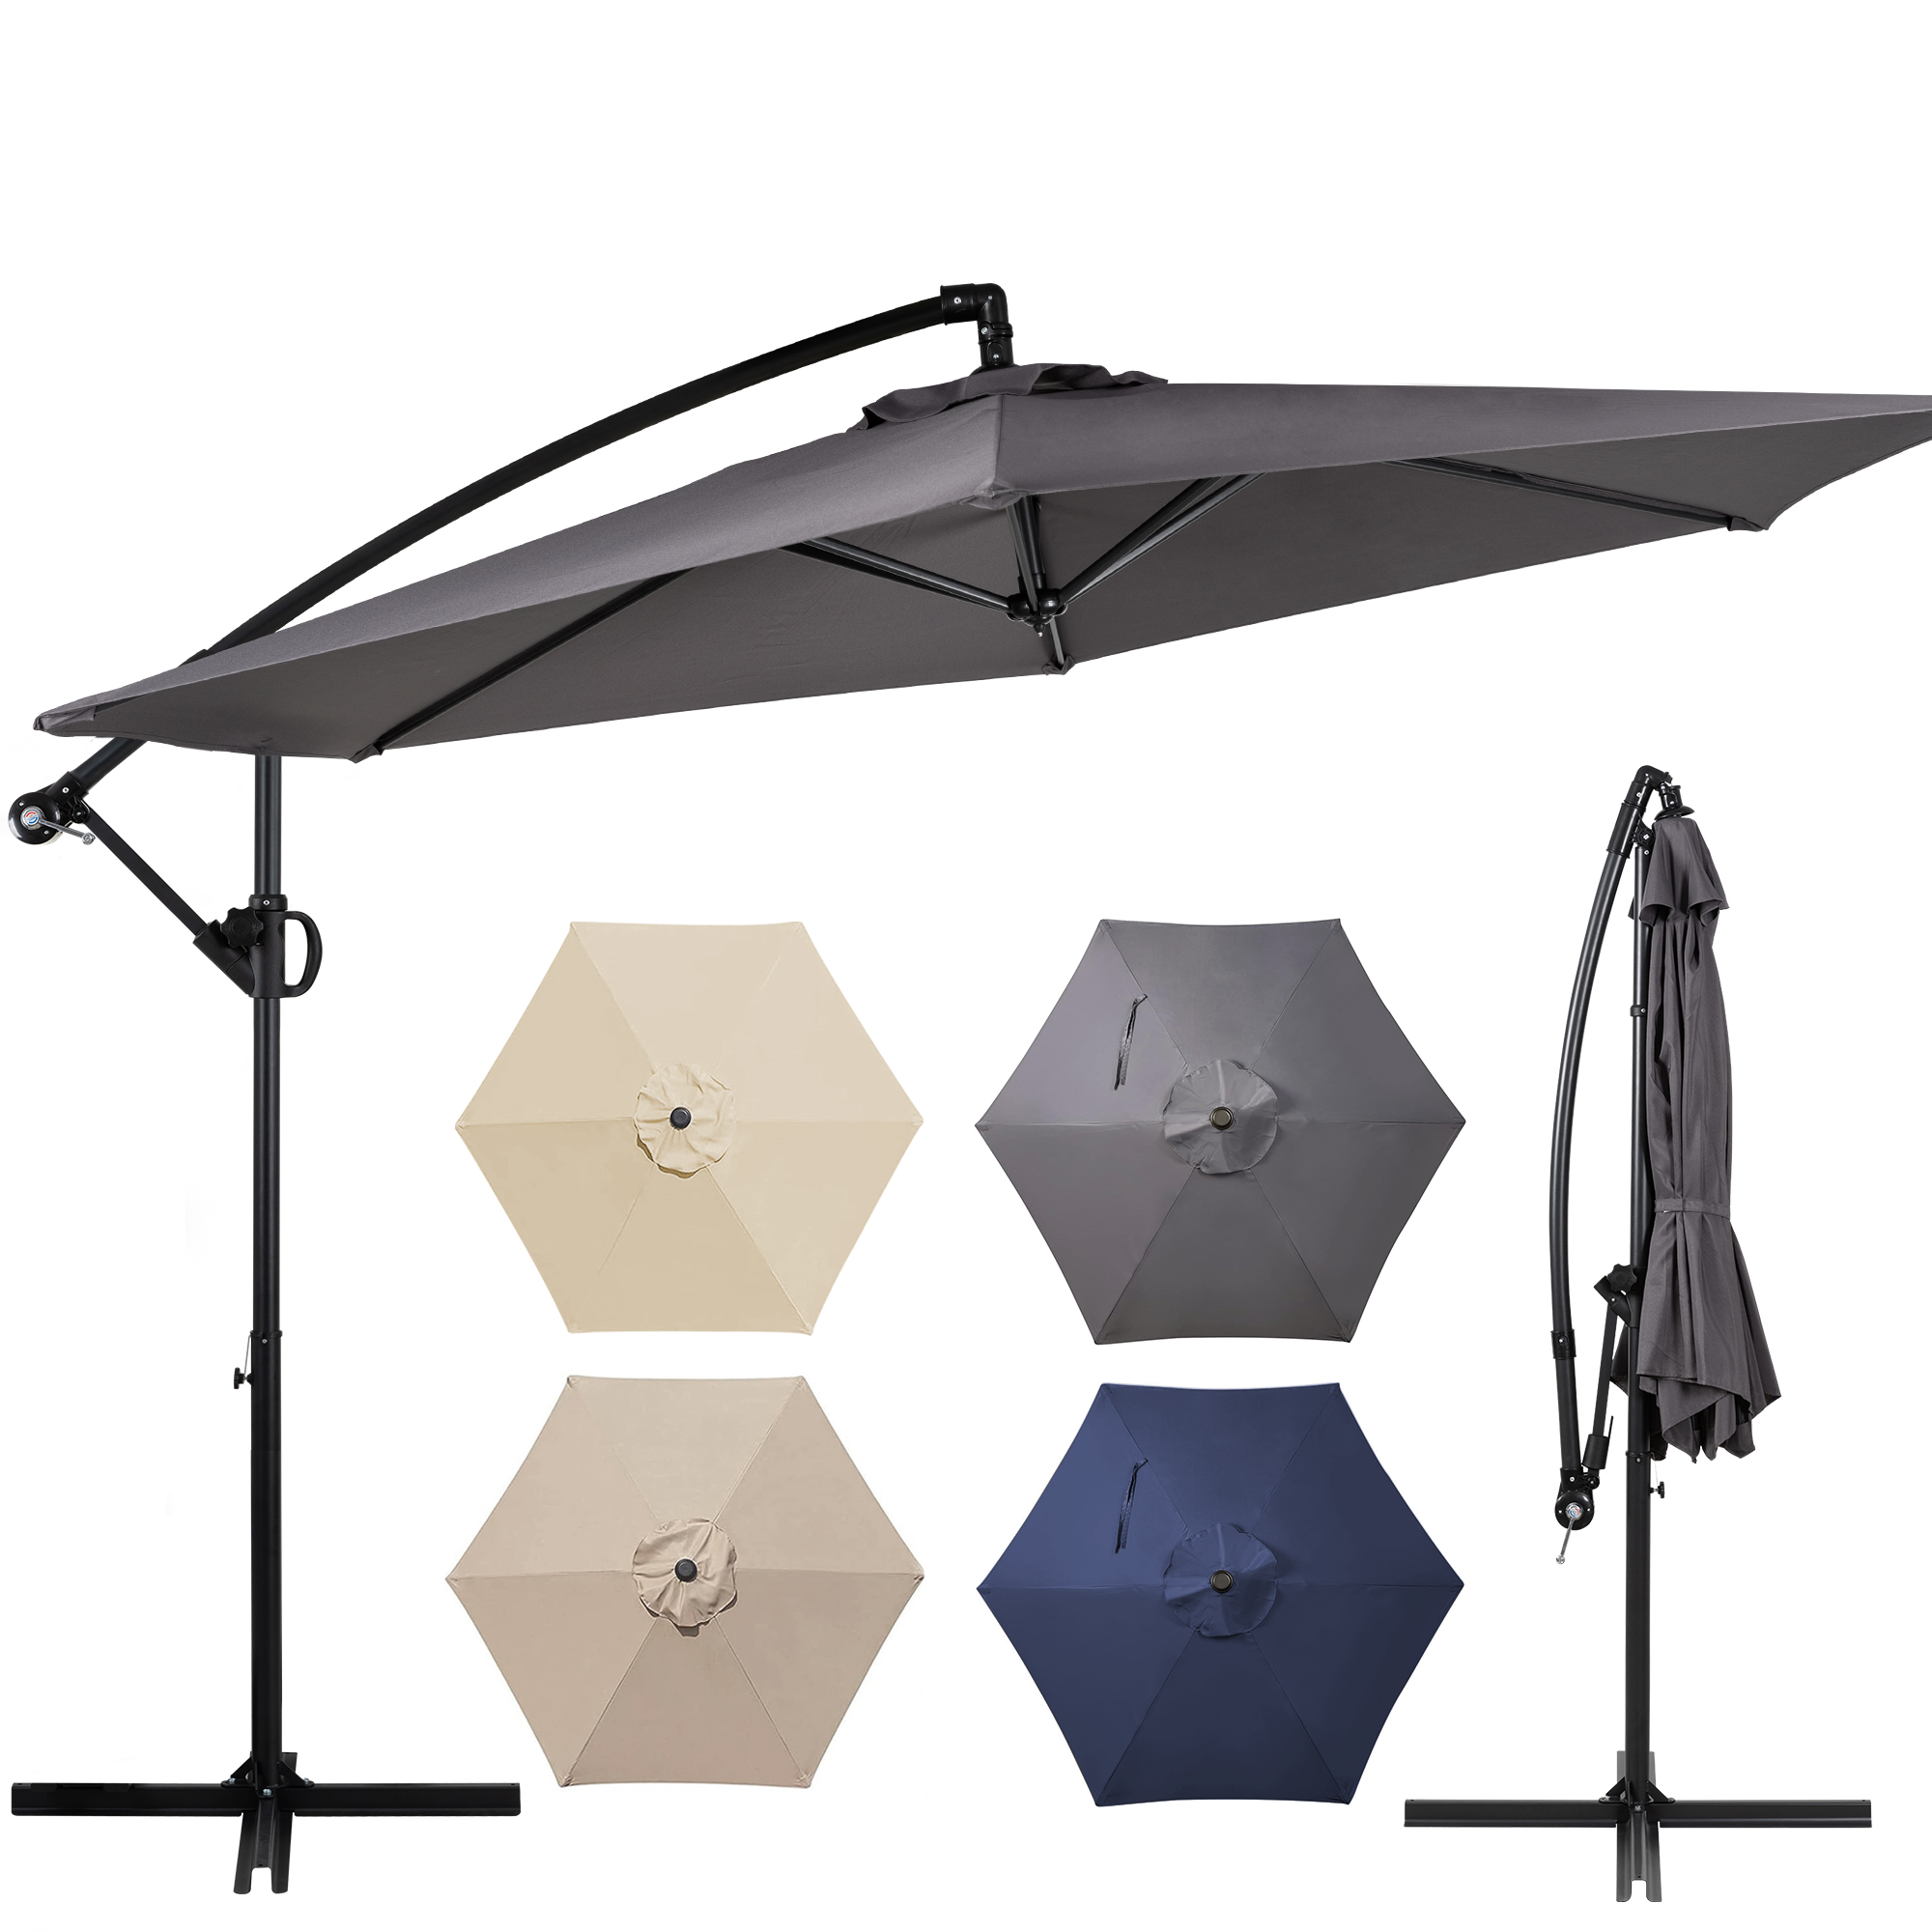 Walsunny Patio Offset Umbrella Easy Tilt Adjustment,Crank and Cross Base, Outdoor Cantilever Hanging Umbrella with 8 Ribs Dark Gray - image 1 of 7